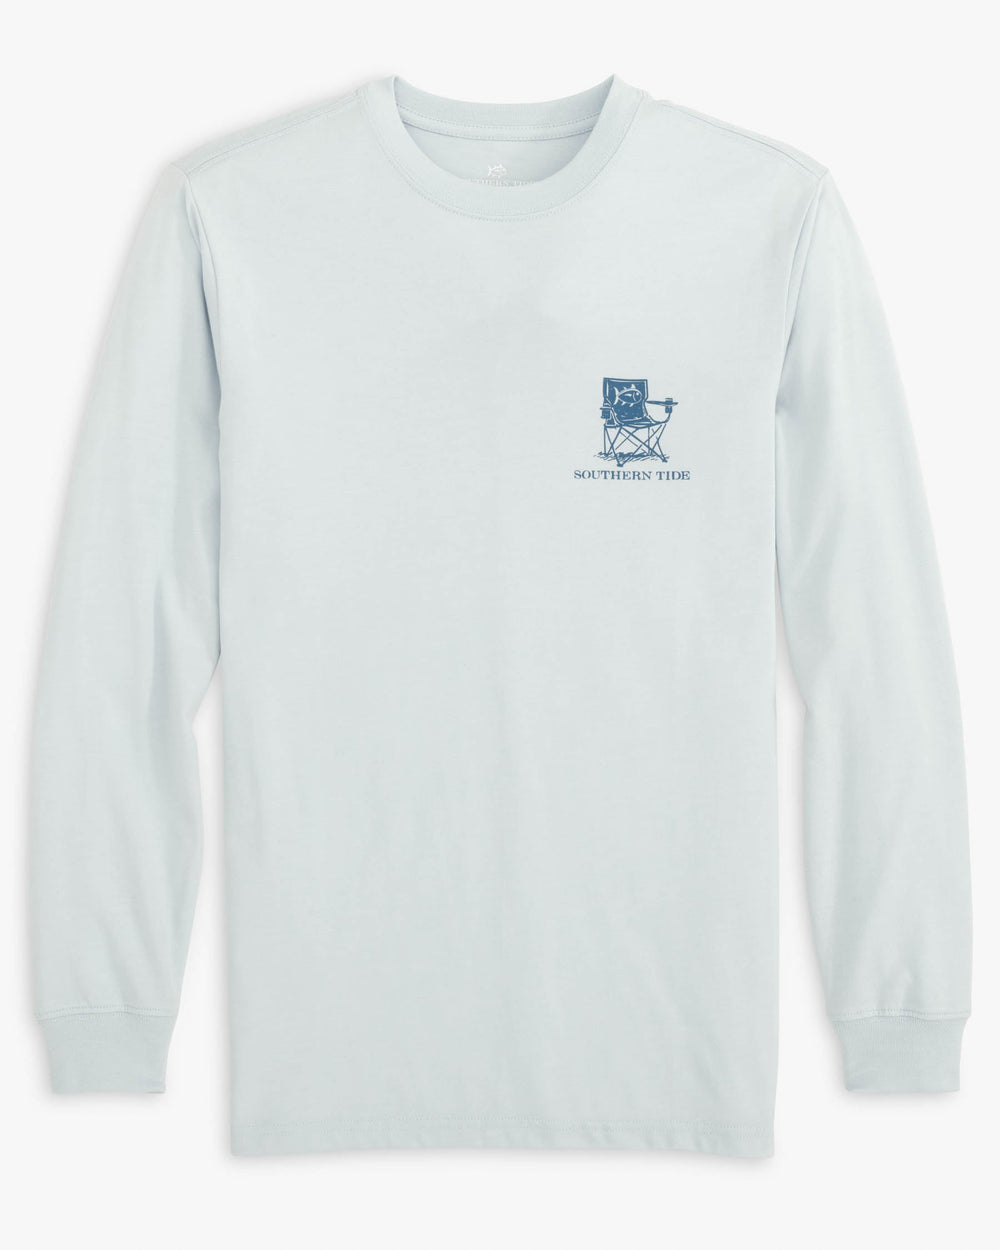 The front view of the Time for a Tailgate Long Sleeve T-Shirt by Southern Tide - Iceberg Blue